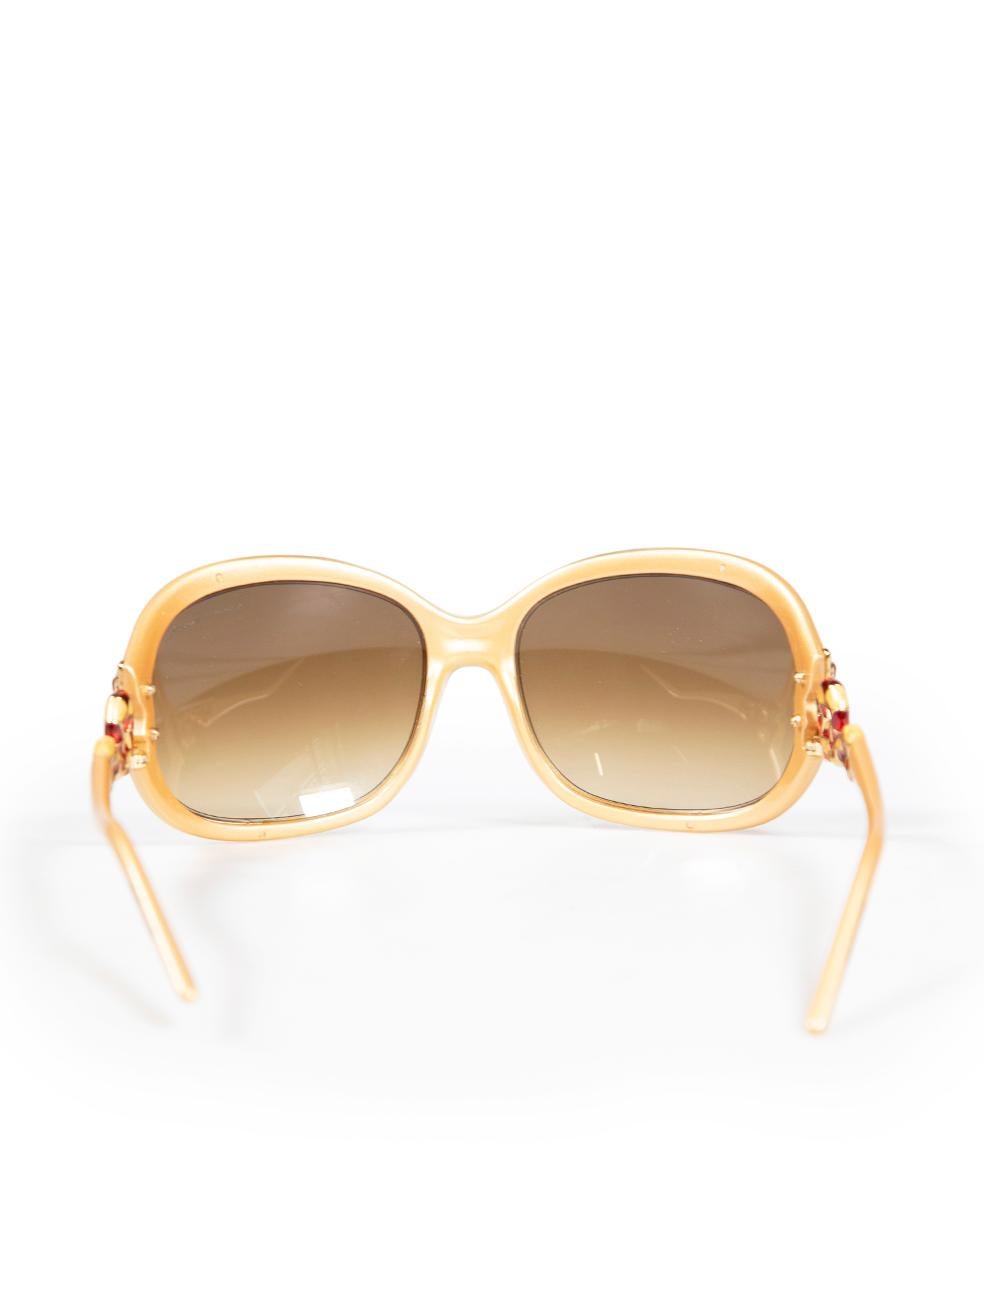 Roberto Cavalli Gold Embellished Sunglasses In Excellent Condition For Sale In London, GB